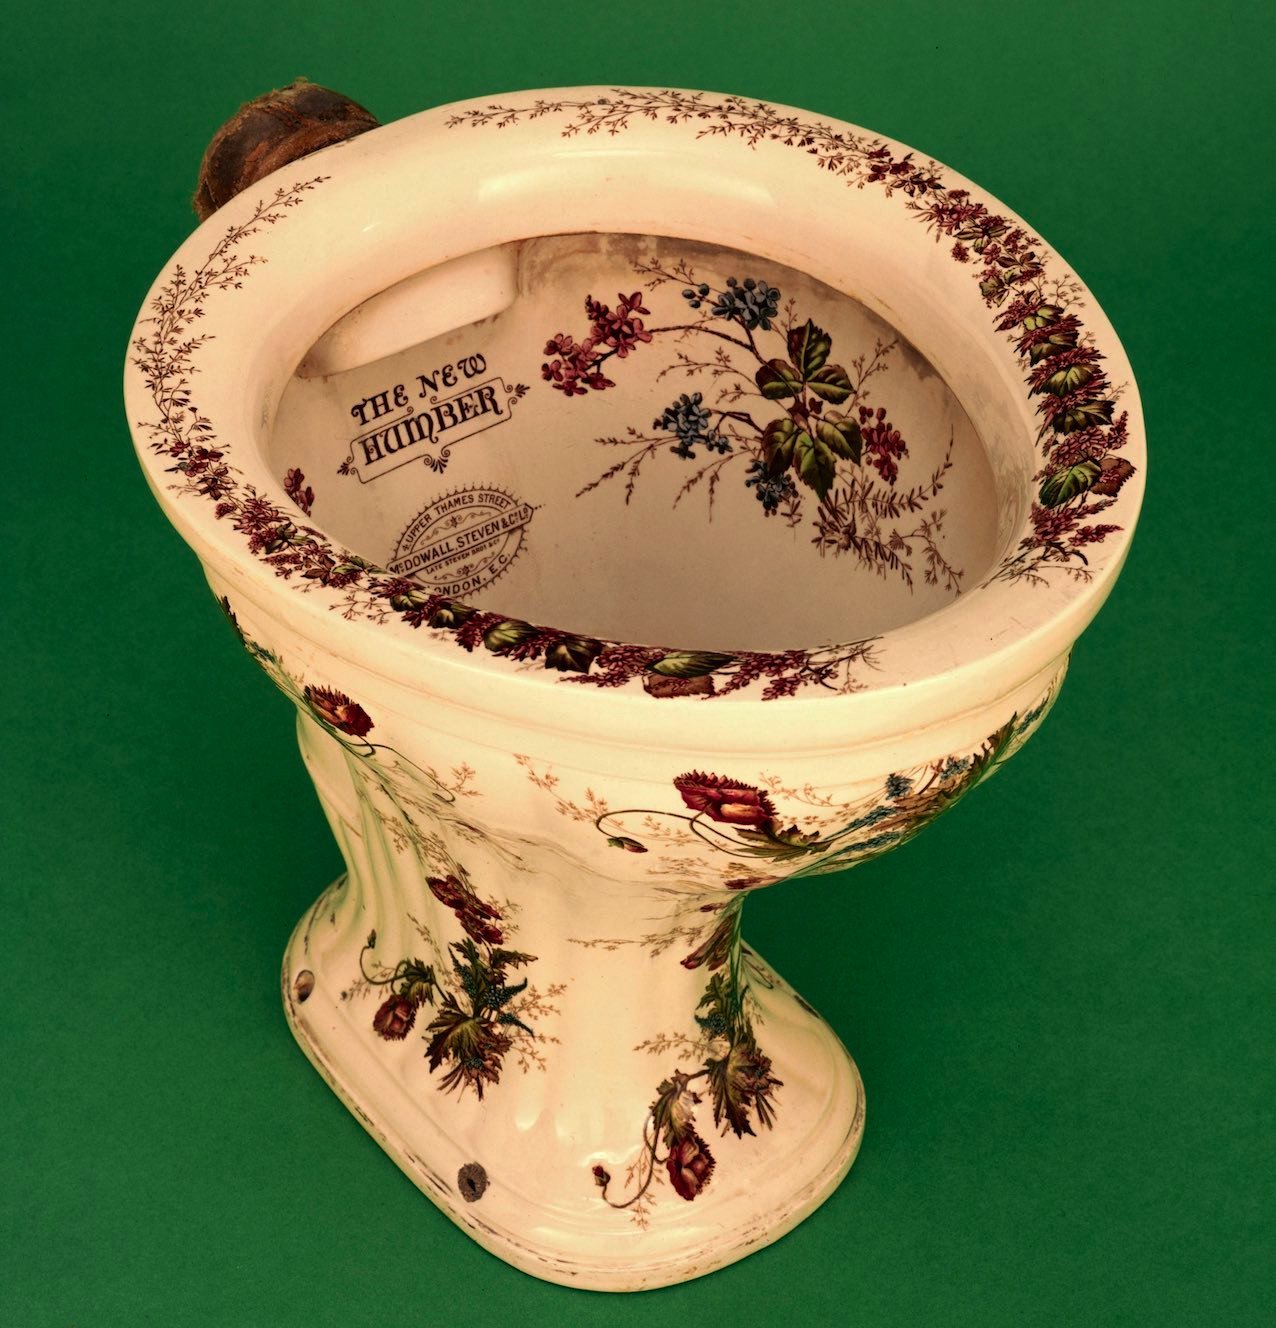 A toilet bowl with flower designs inside and out as well as the words 'The New Humber' printed inside